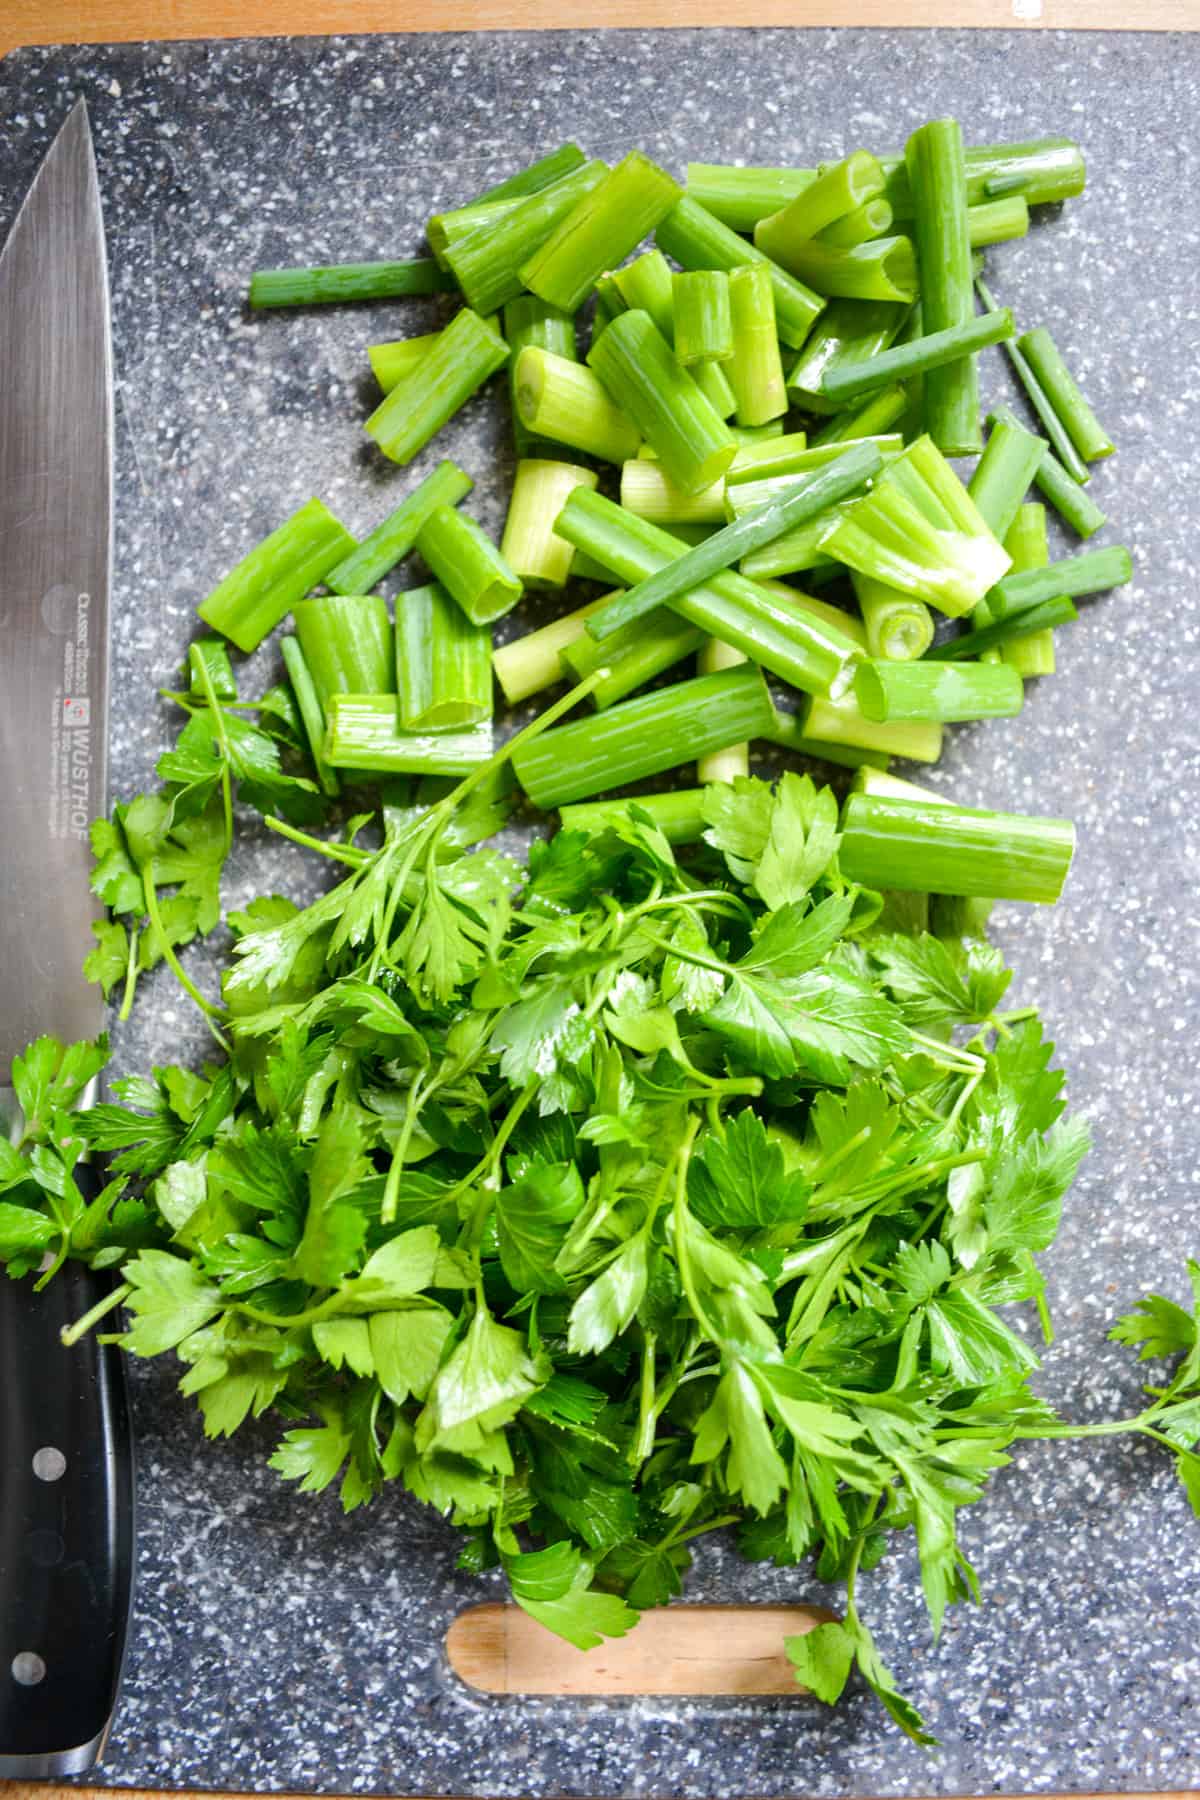 Roughly chopped scallions and parsley leaves